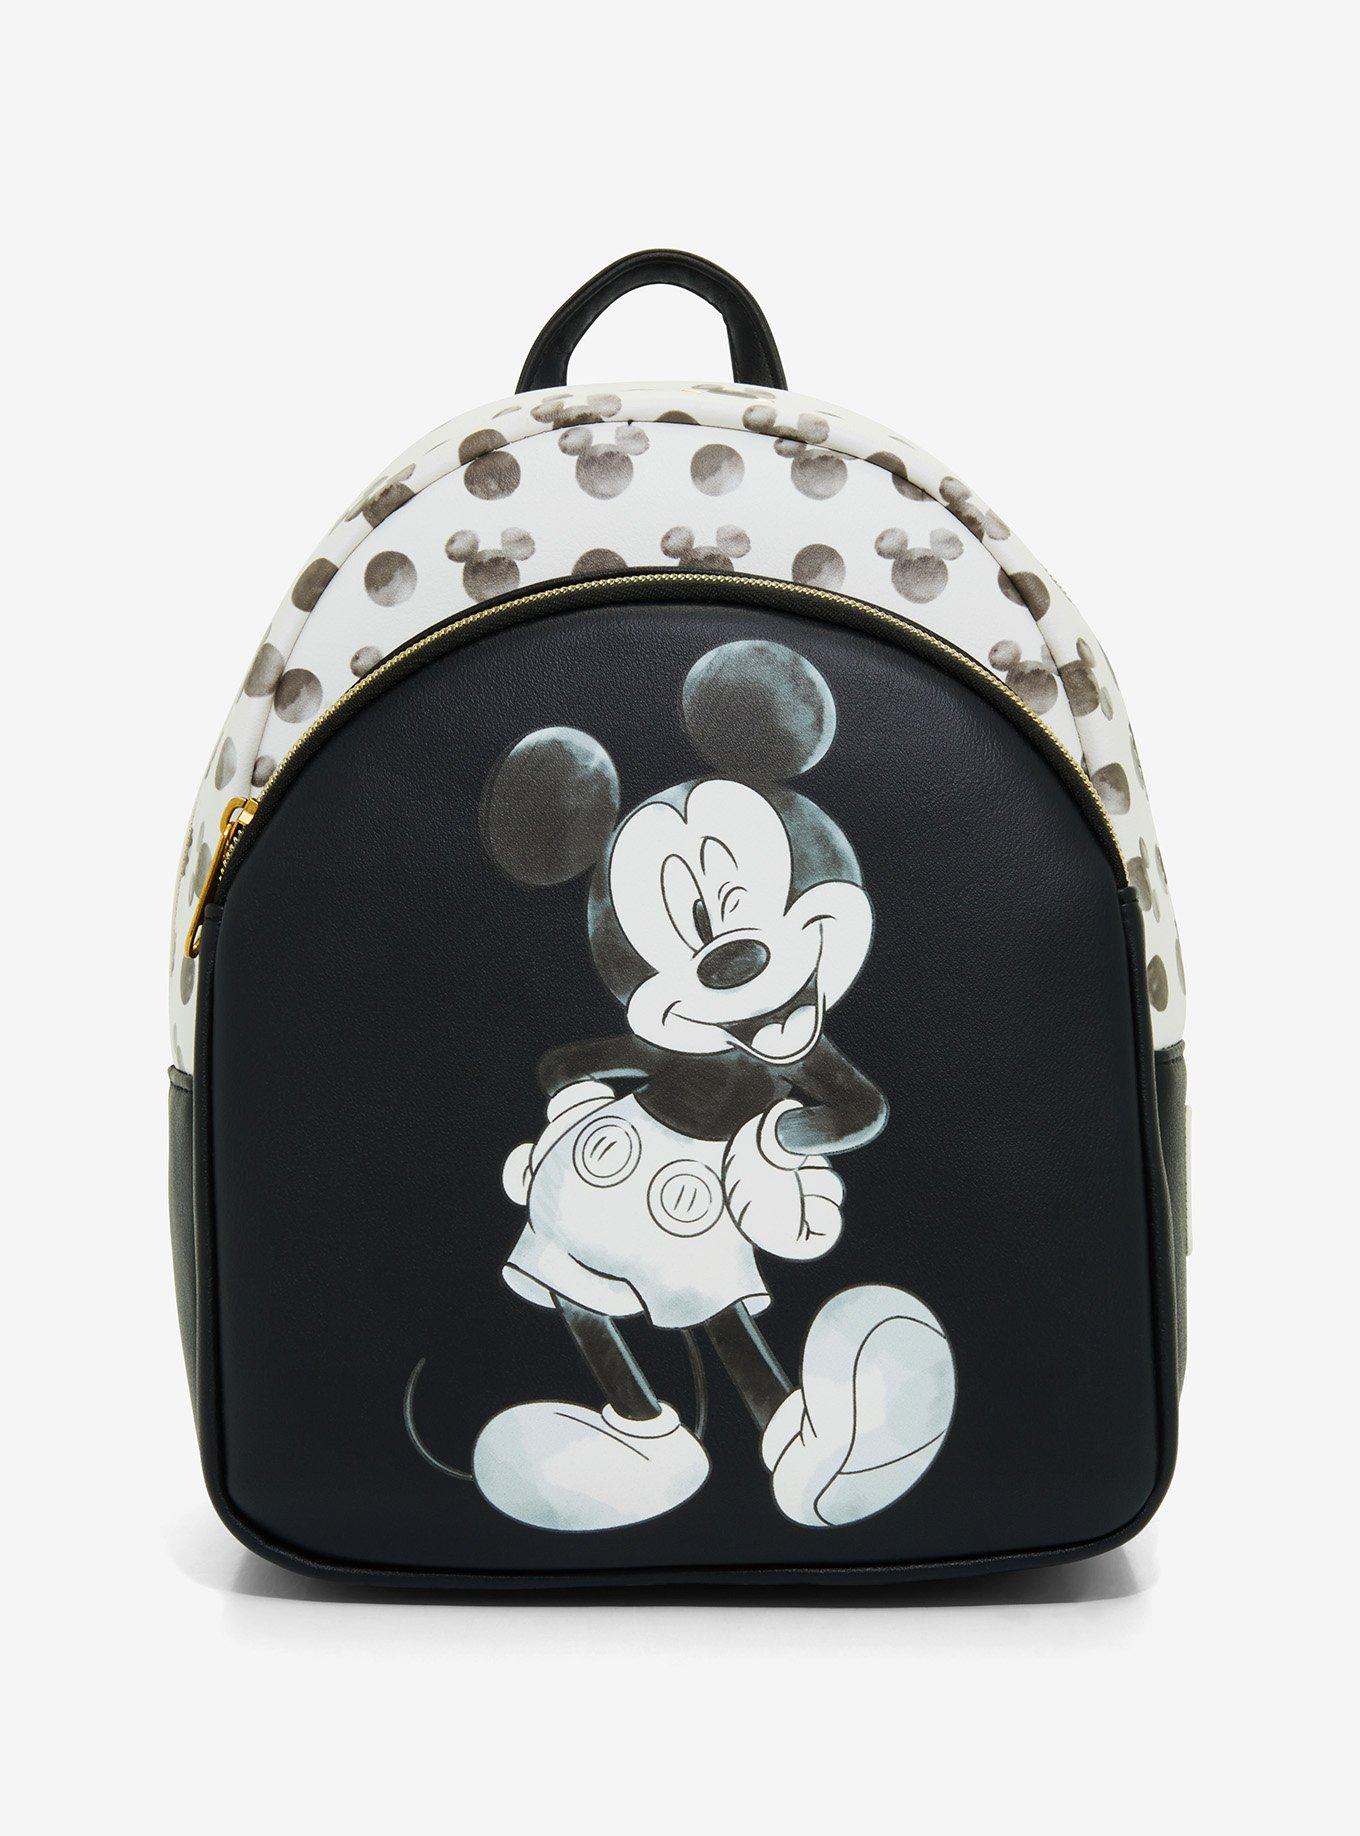 Brand Disney Women's Leather Backpack Bags For Female Luxury Mickey Mouse  Cartoon Shoulder Bag Ladies Cute Small Packages 2021